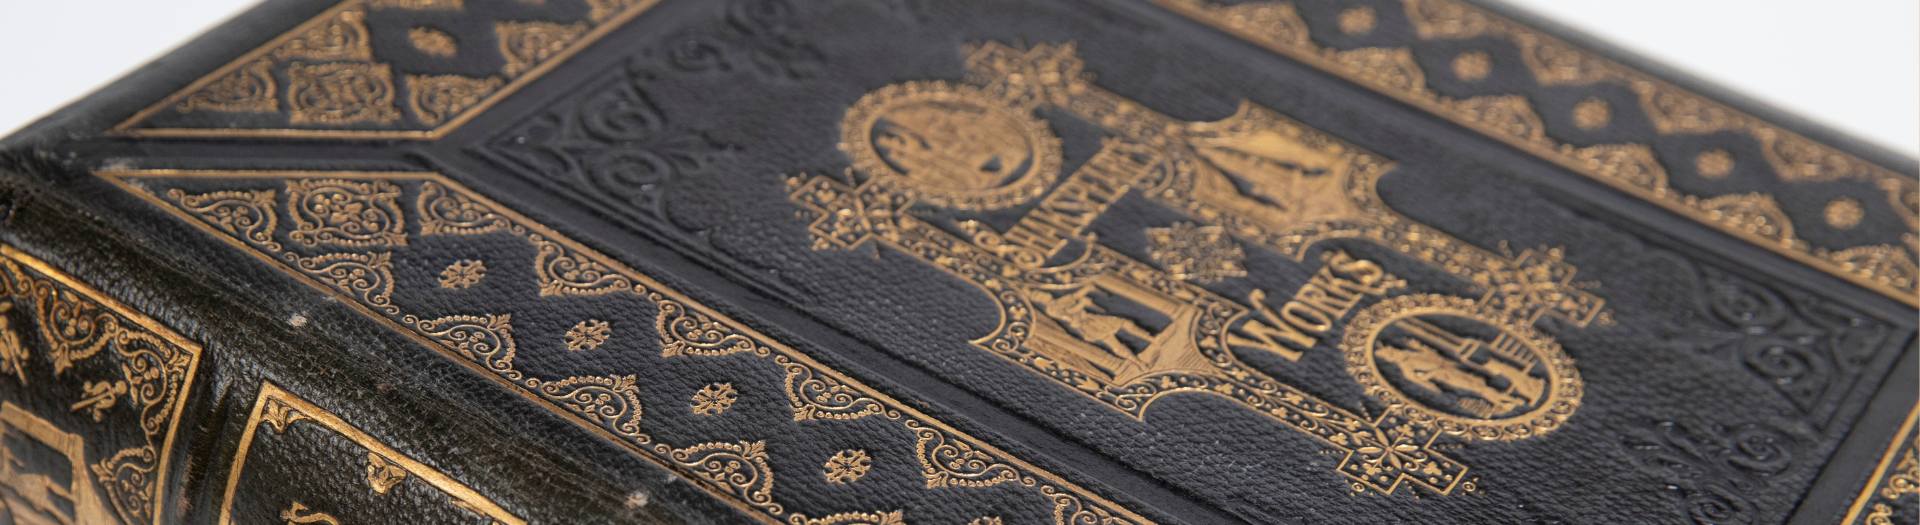 Cover of old, hardcover black book with gold detail. Ornate text on the cover reads 'Shakespeare's Works' 